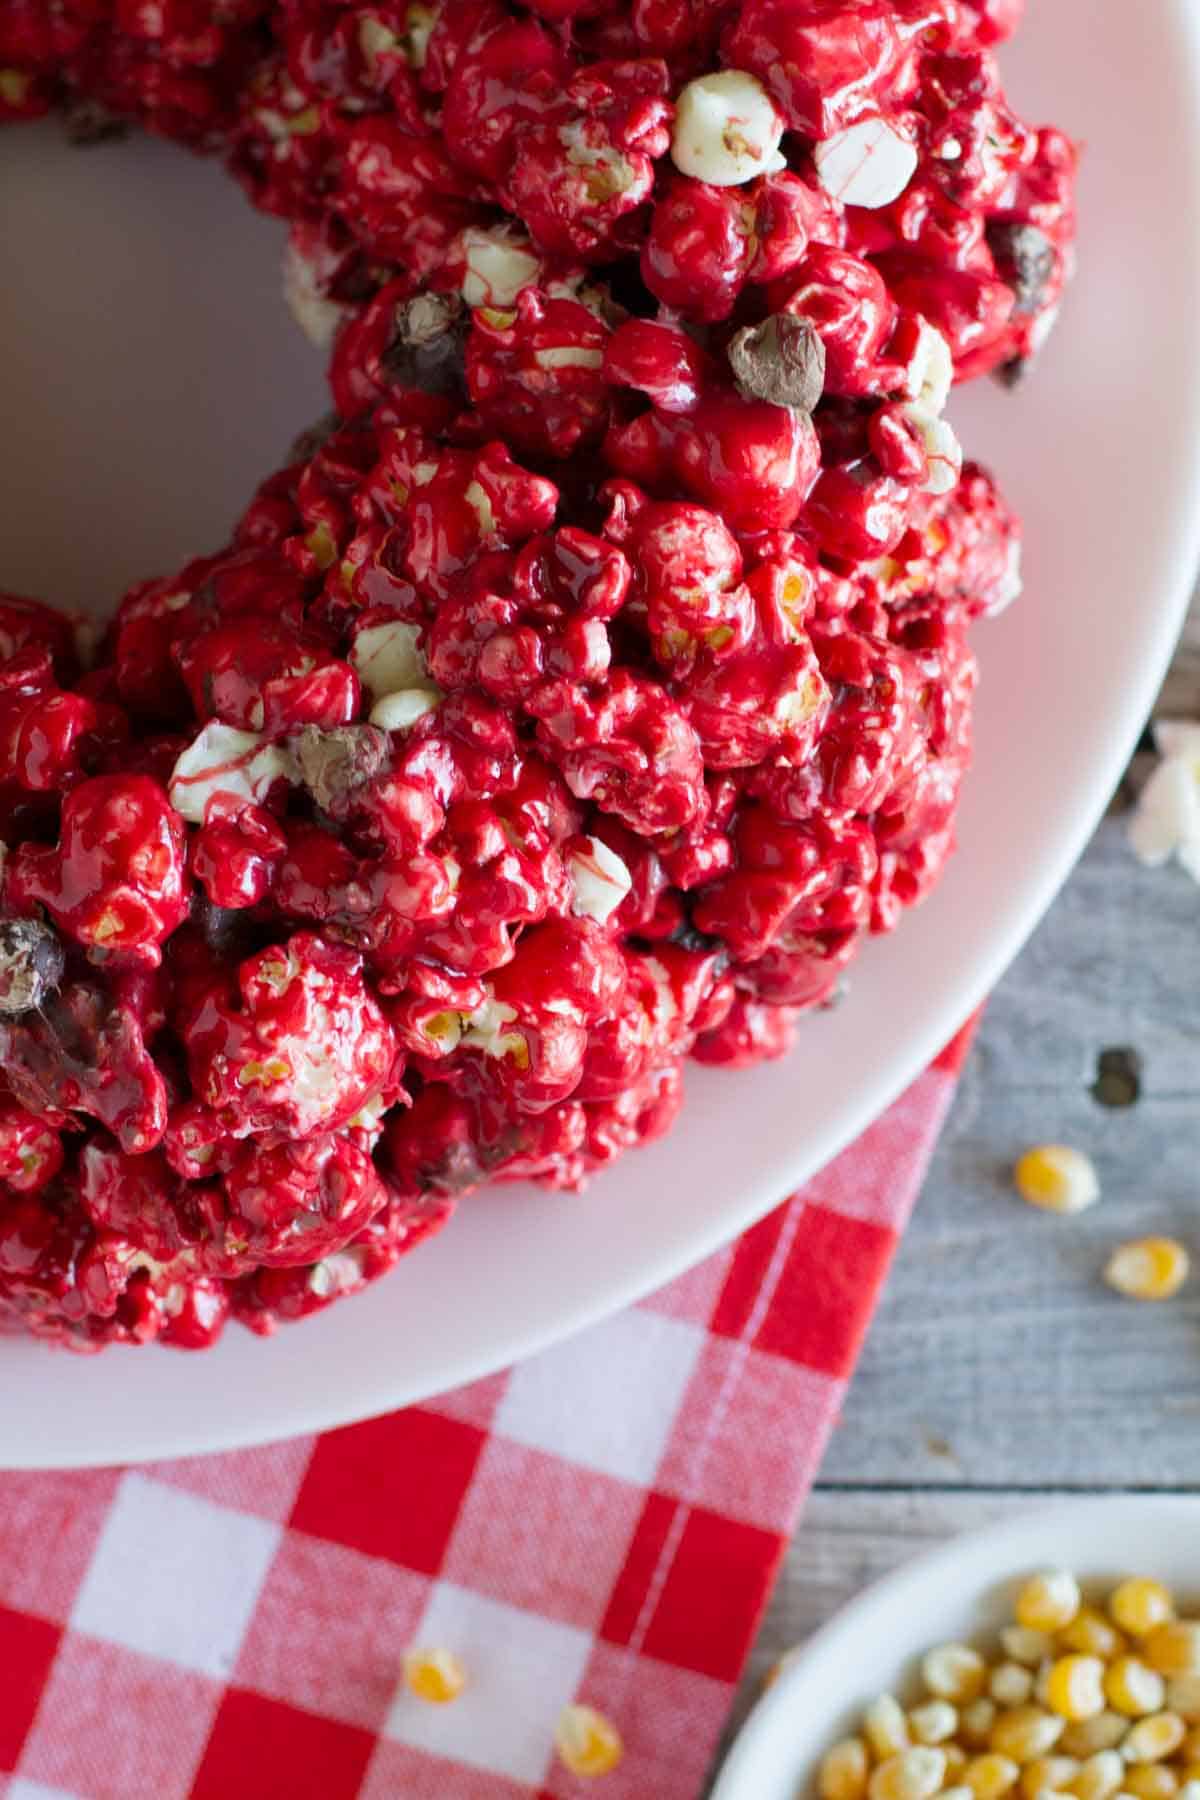 Red velvet popcorn cake with chocolate chips.